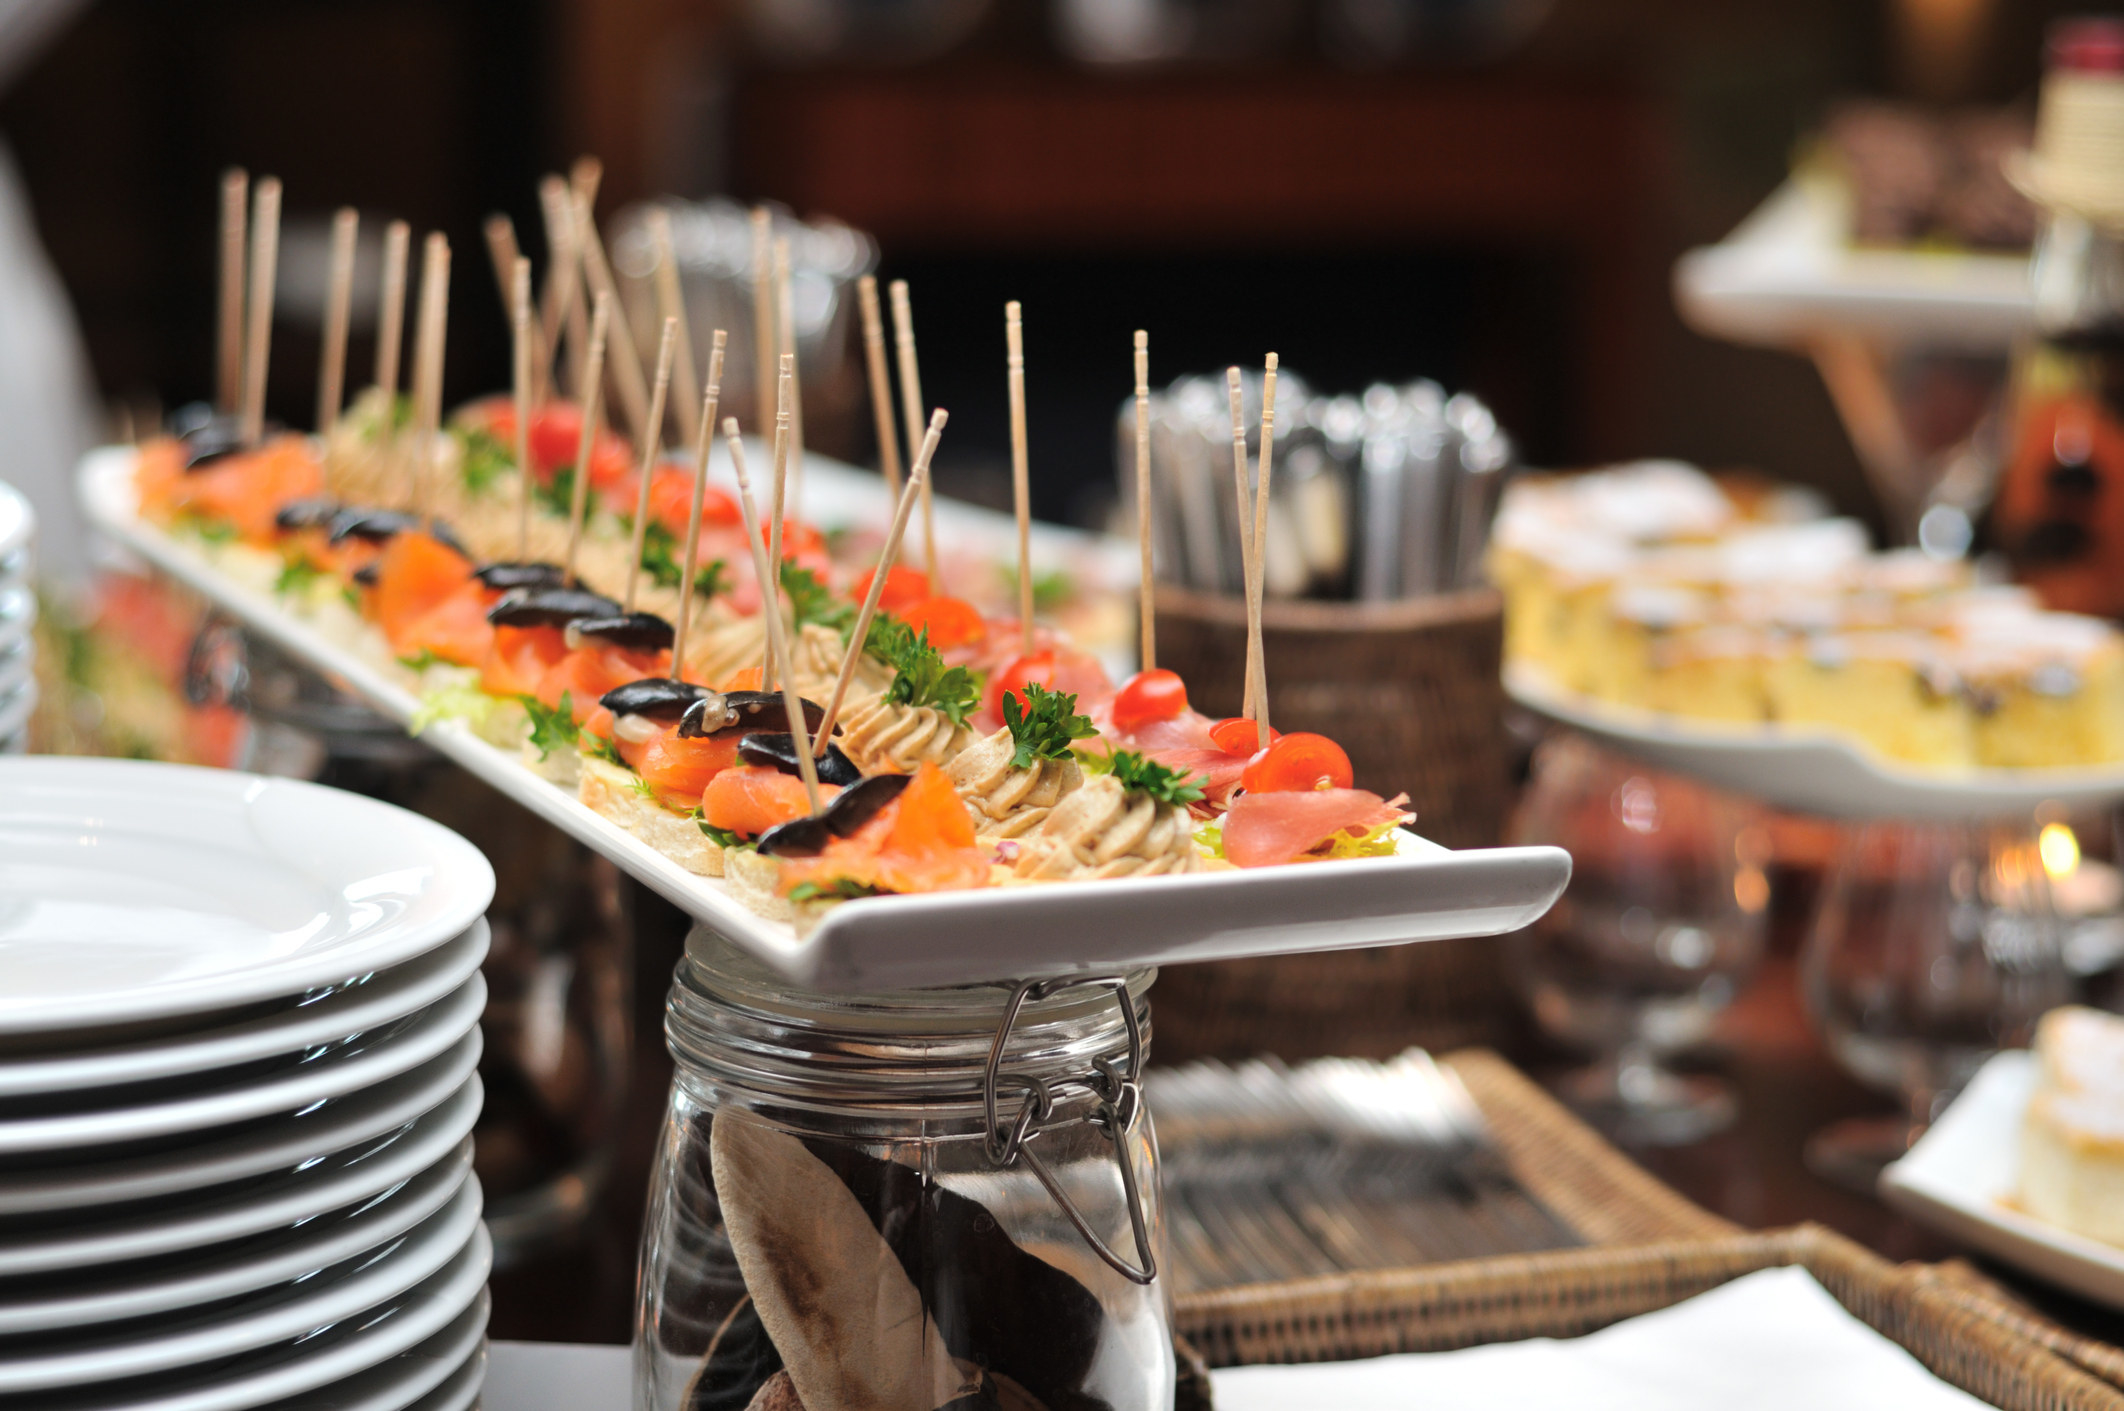 Wedding appetizers served on a table